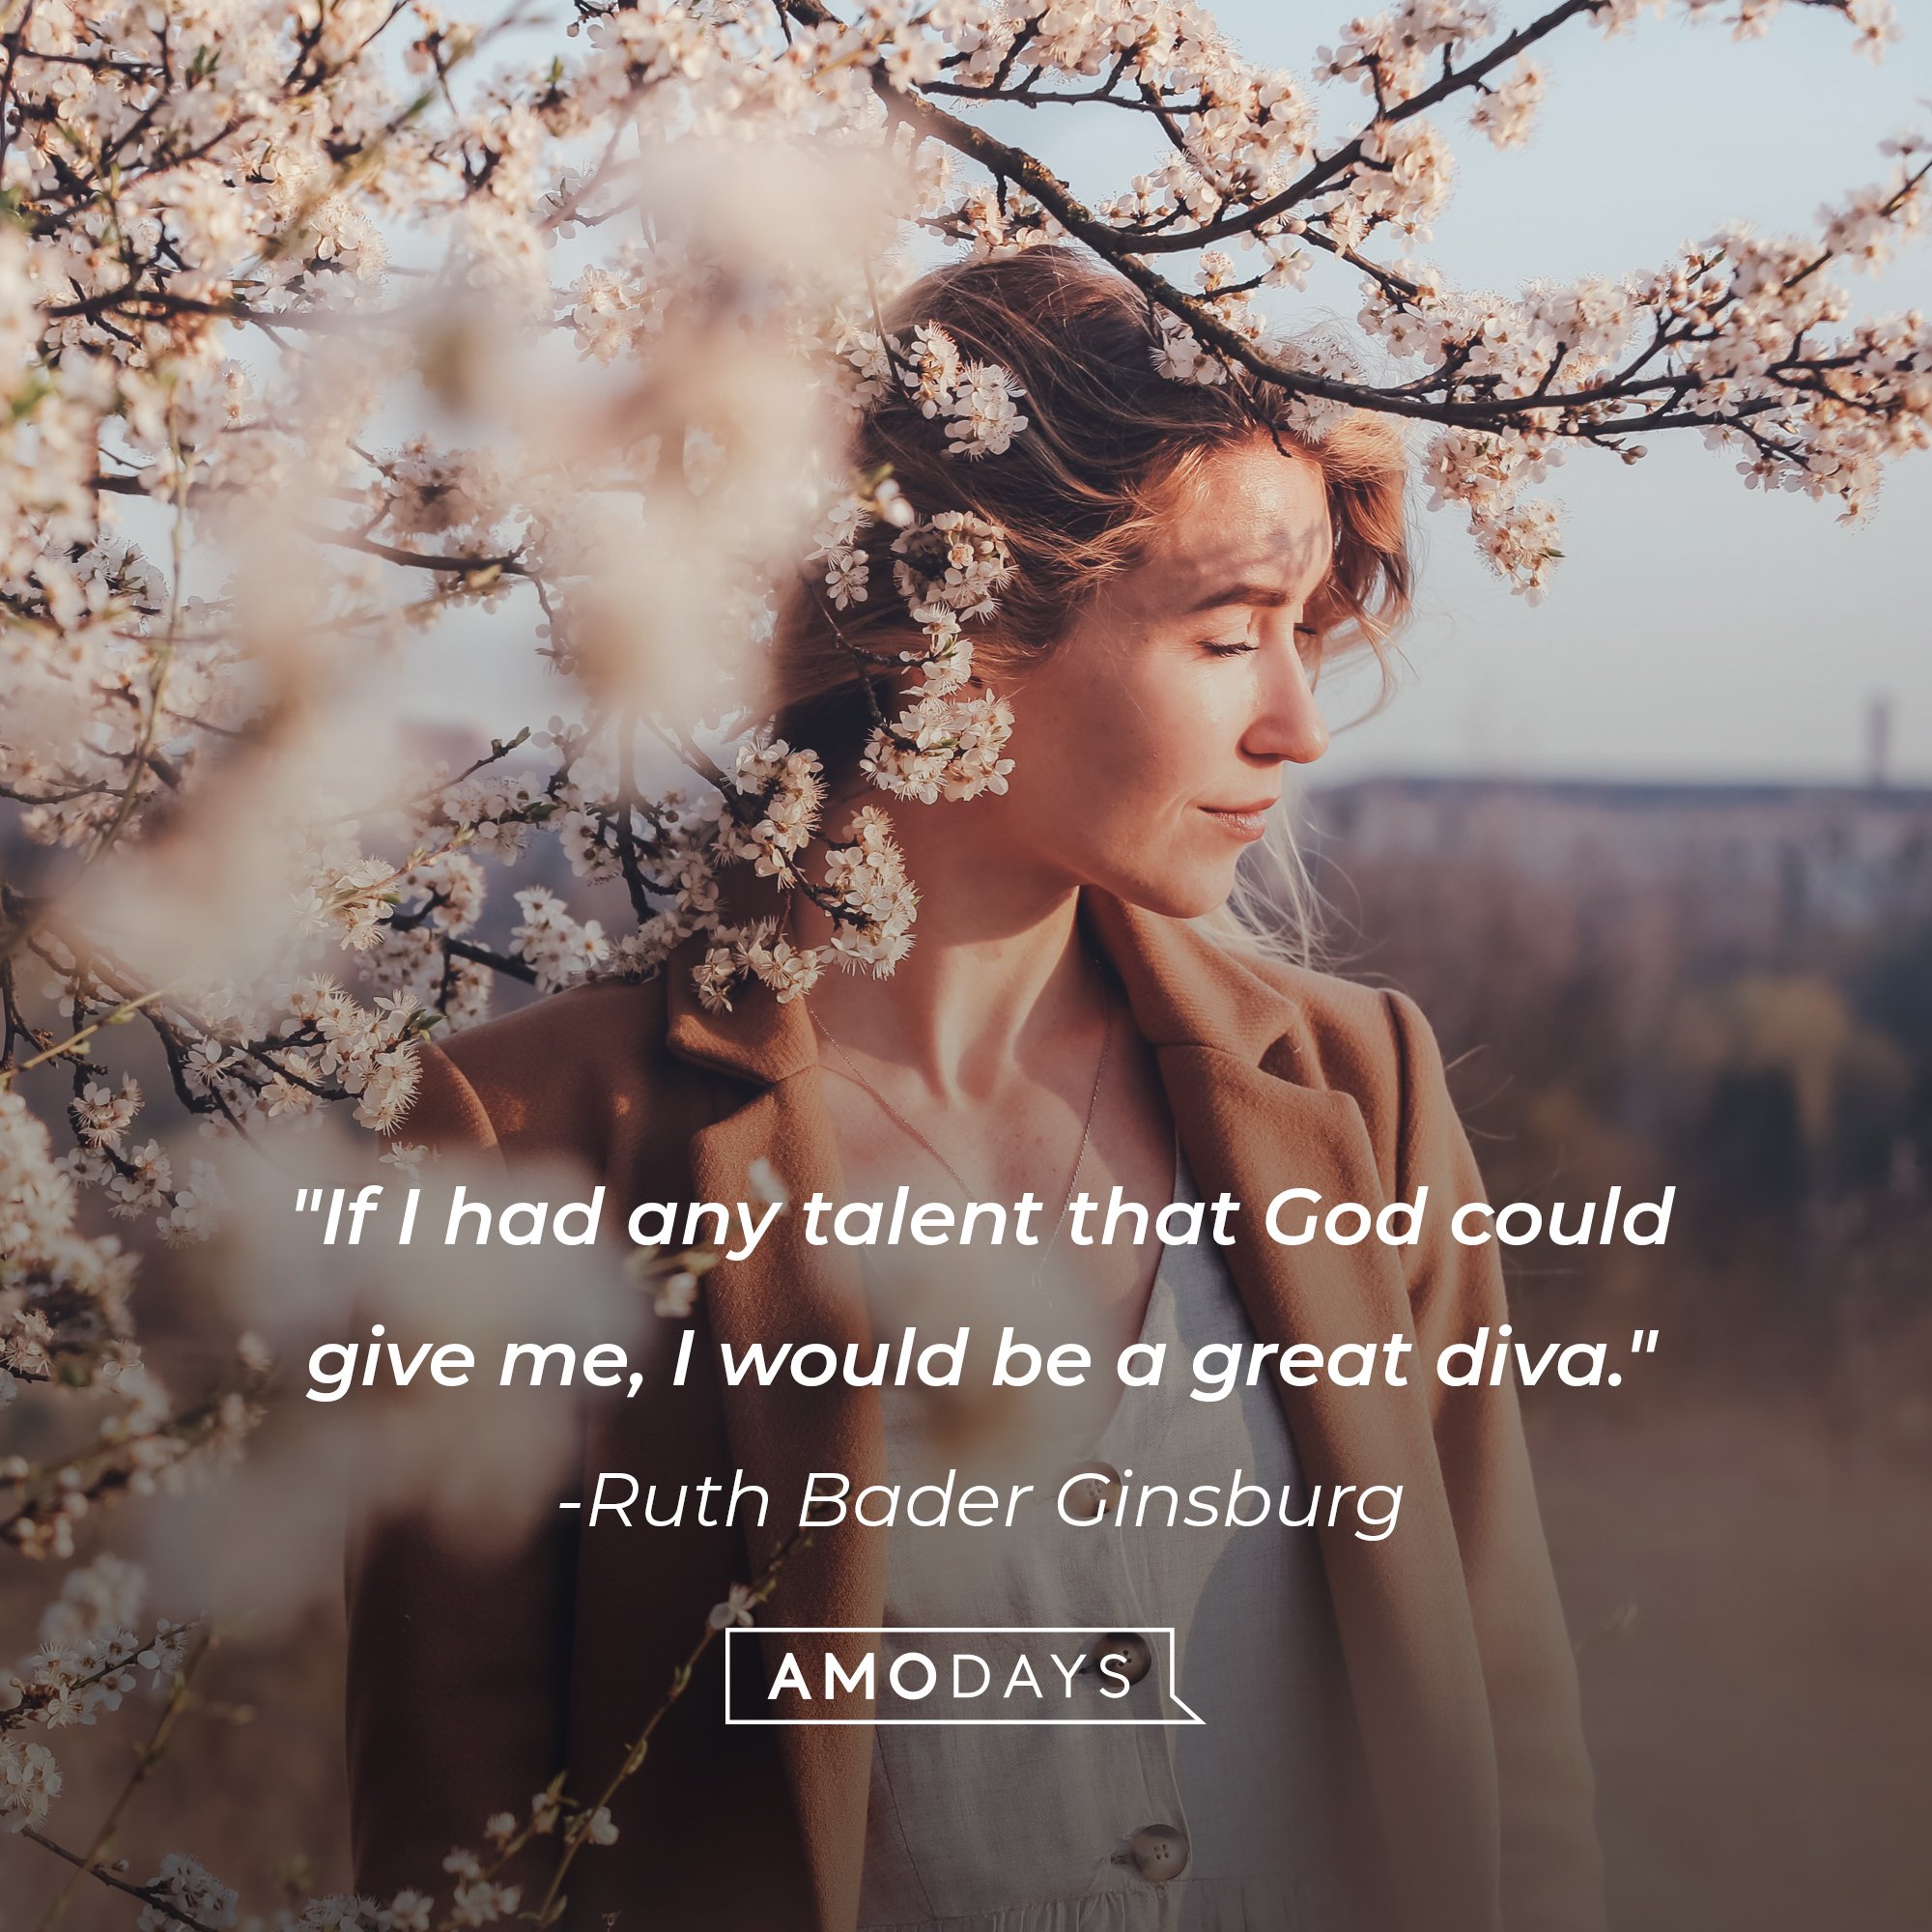 Ruth Bader Ginsburg’s quote: "If I had any talent that God could give me, I would be a great diva." | Image: AmoDays